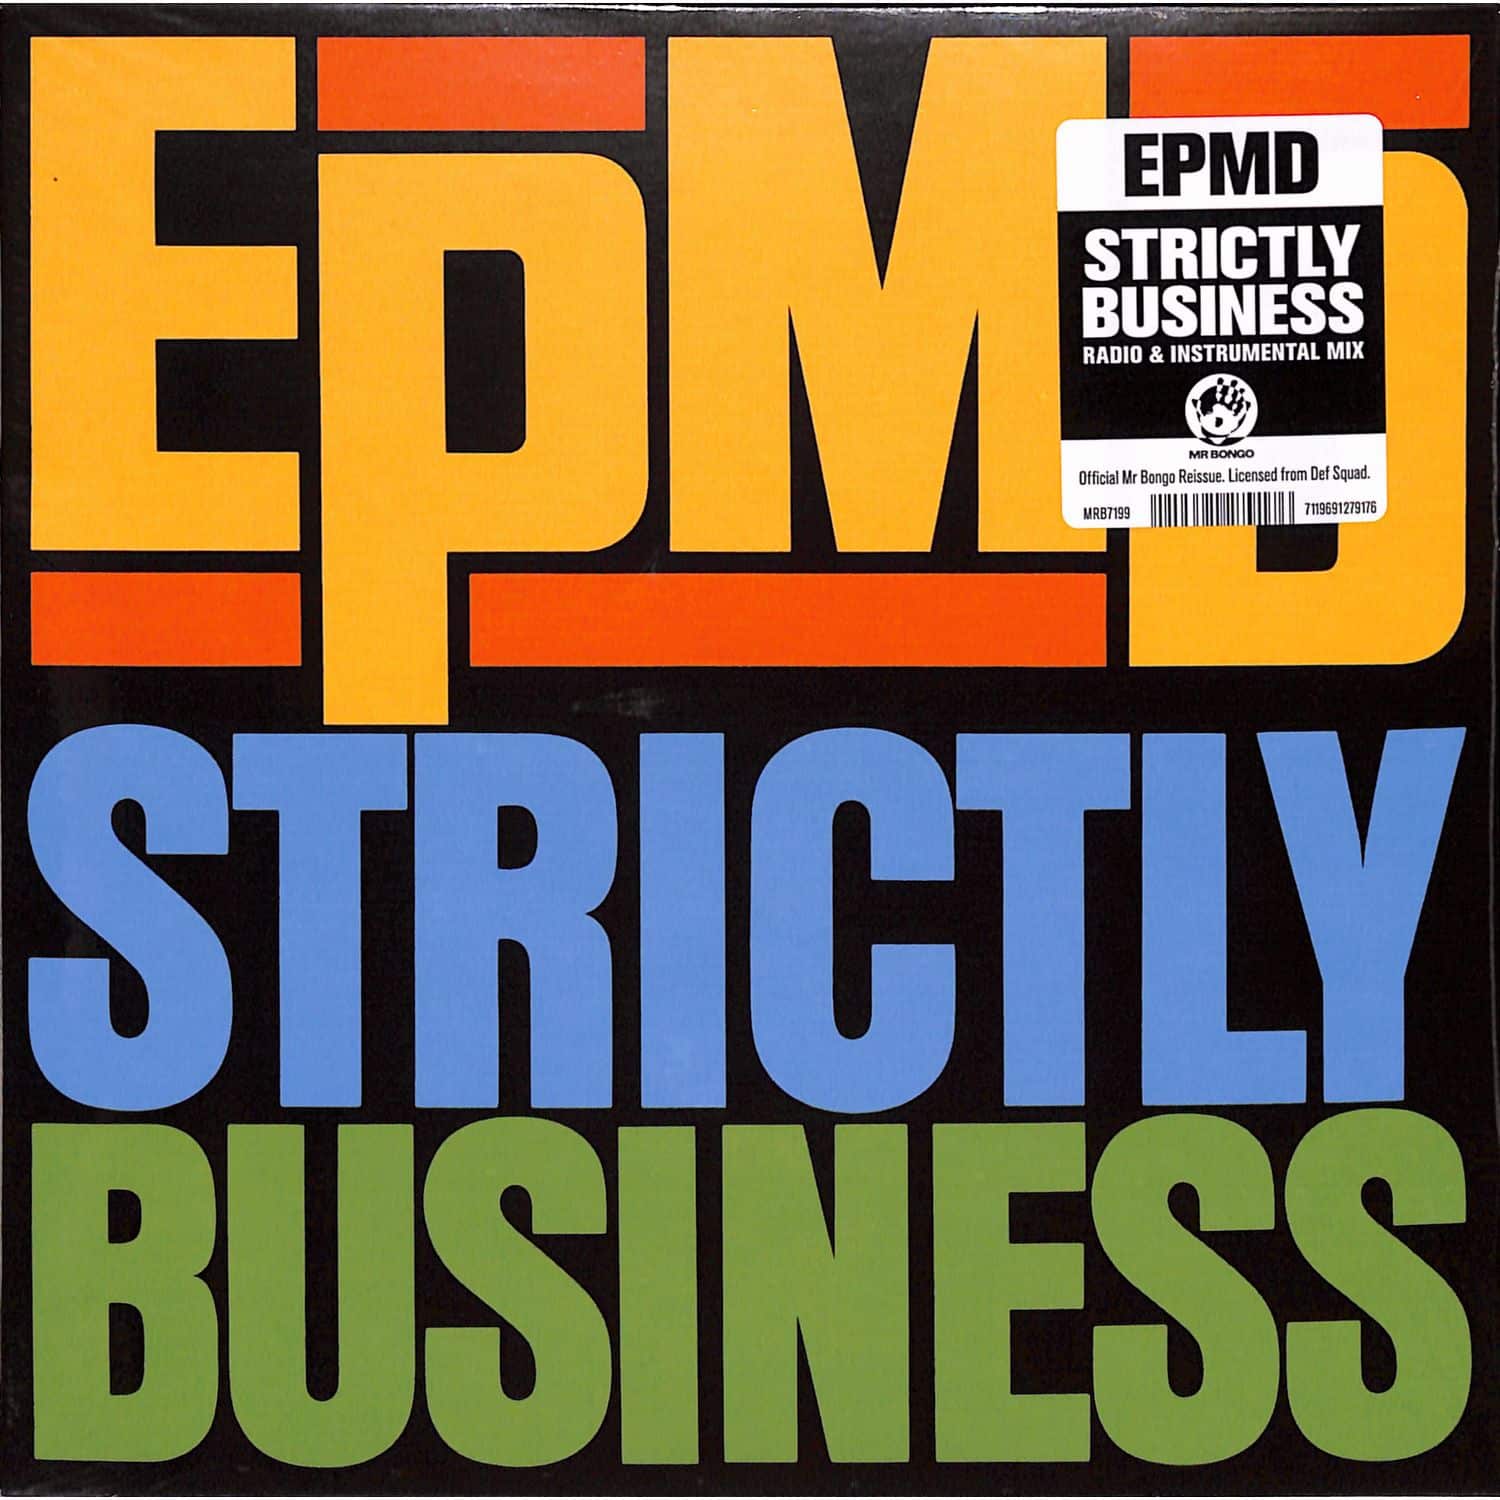 EPMD - STRICTLY BUSINESS 